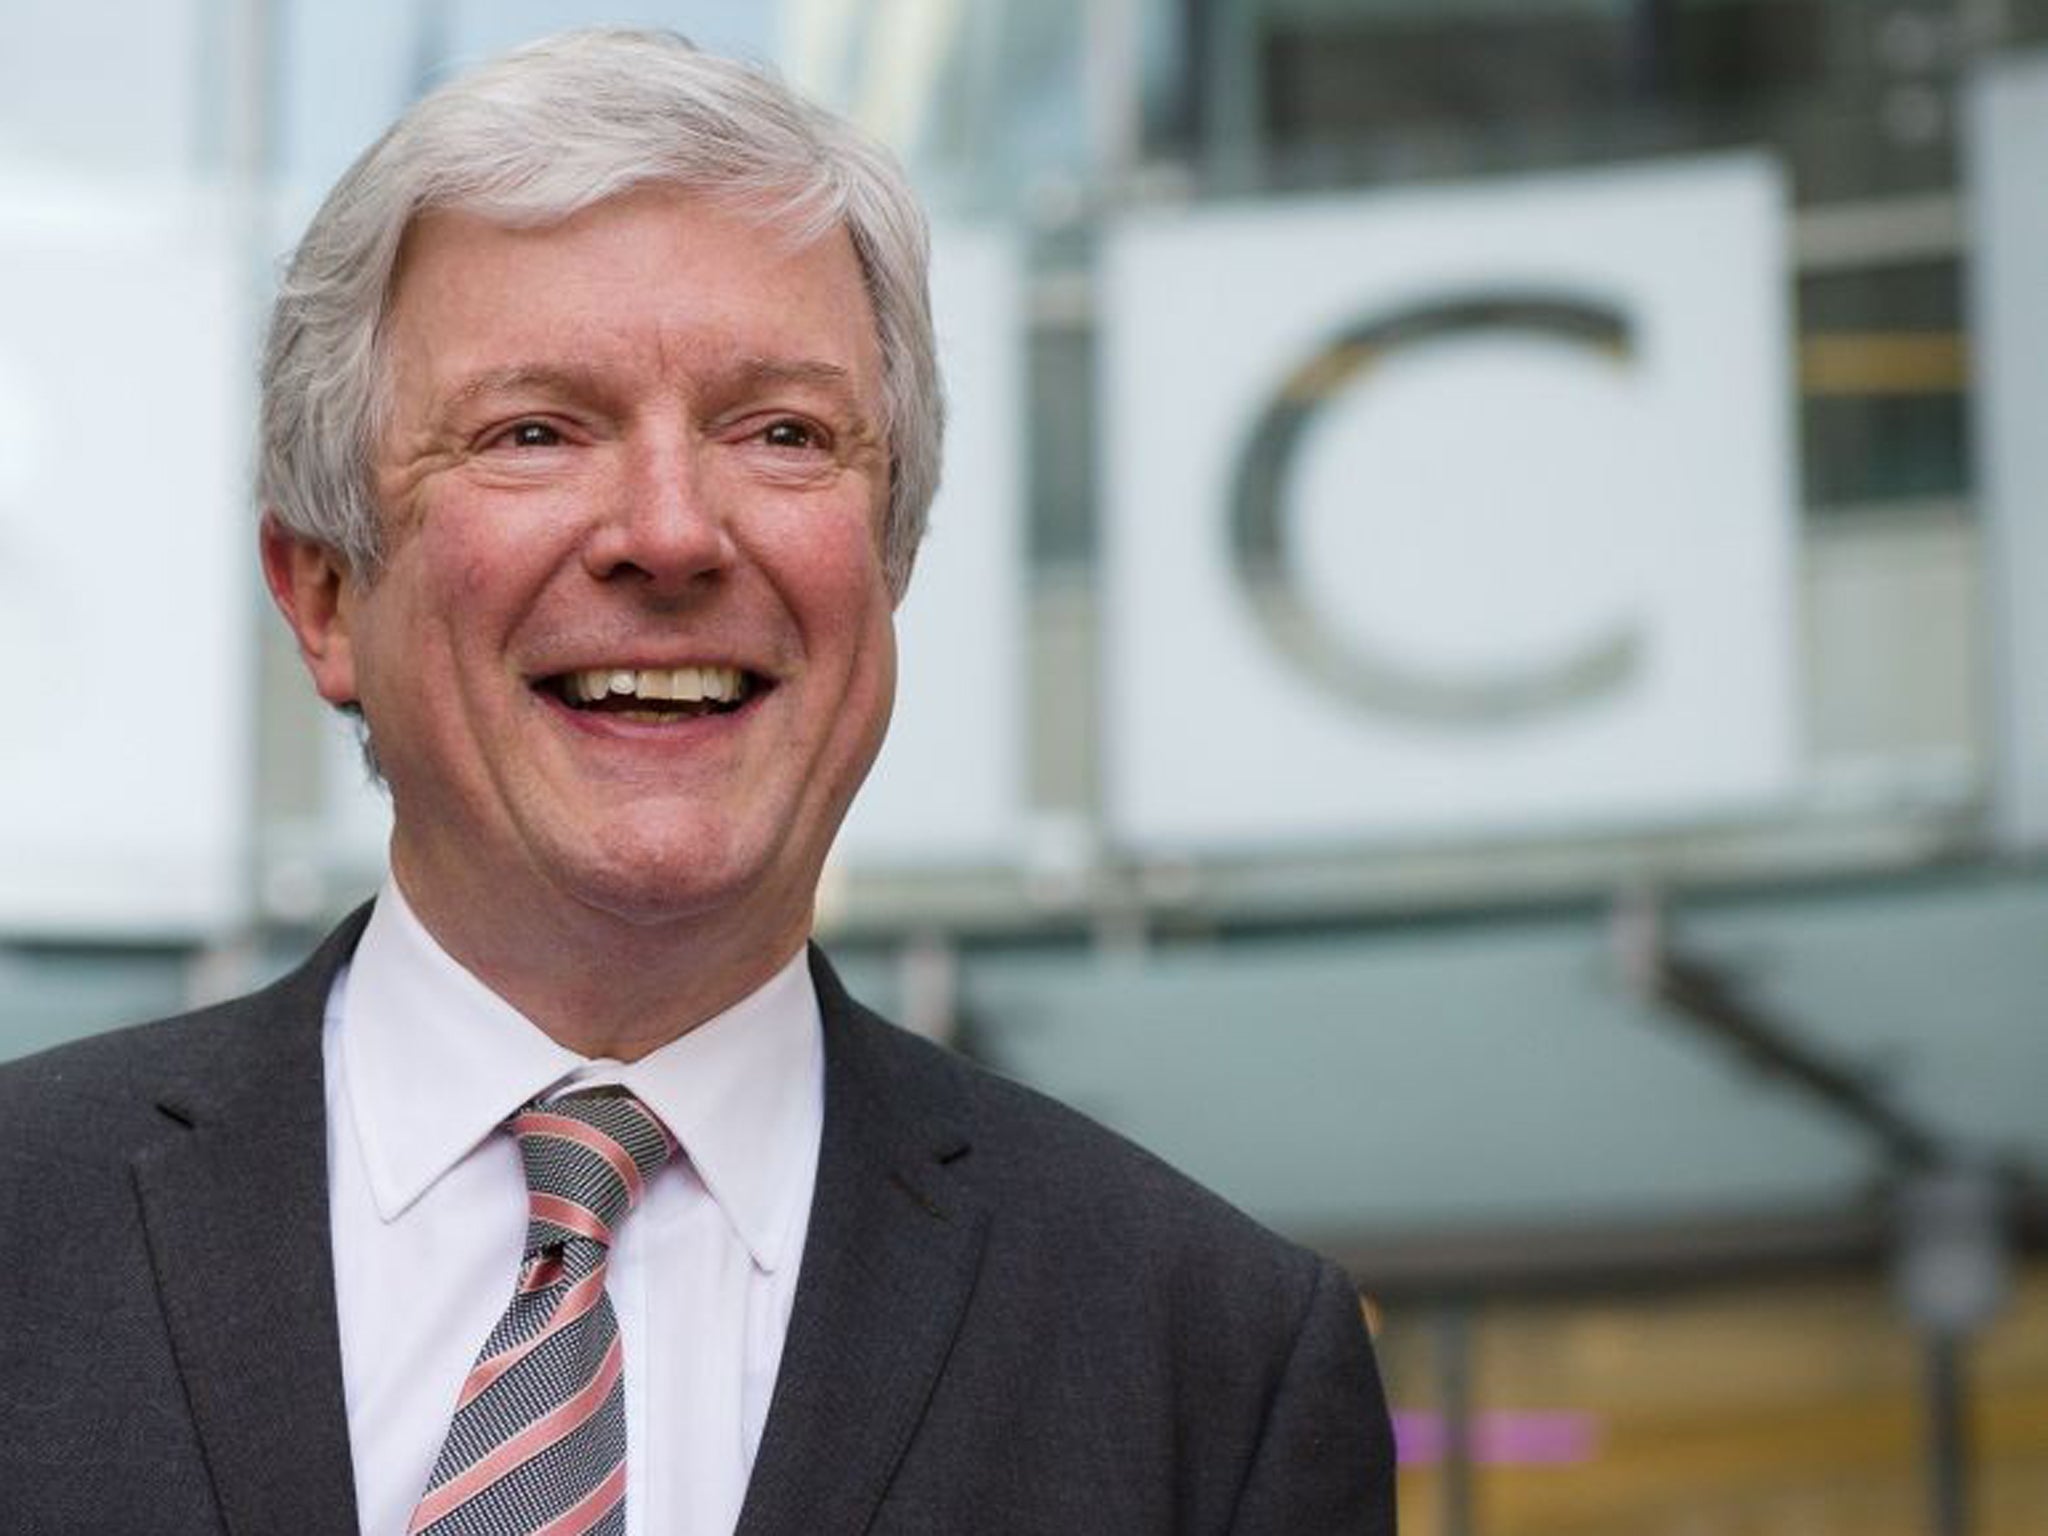 Tony Hall said on Radio 4's Today programme: 'I will not have a pay-off if I'm found wanting in all sorts of ways'